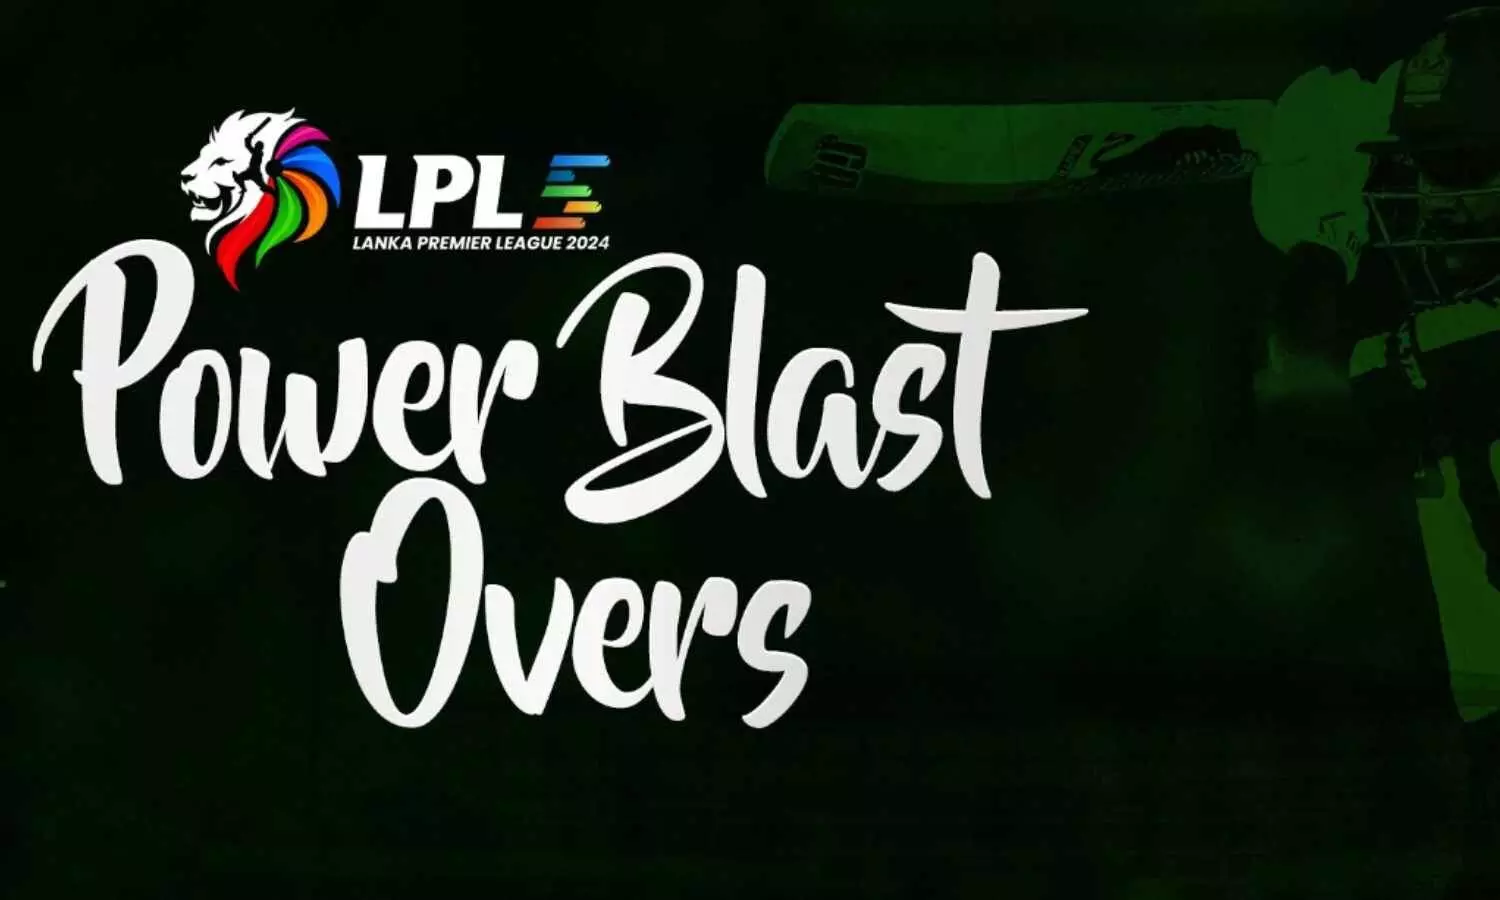 Lanka Premier League to introduce two powerplay overs at the death